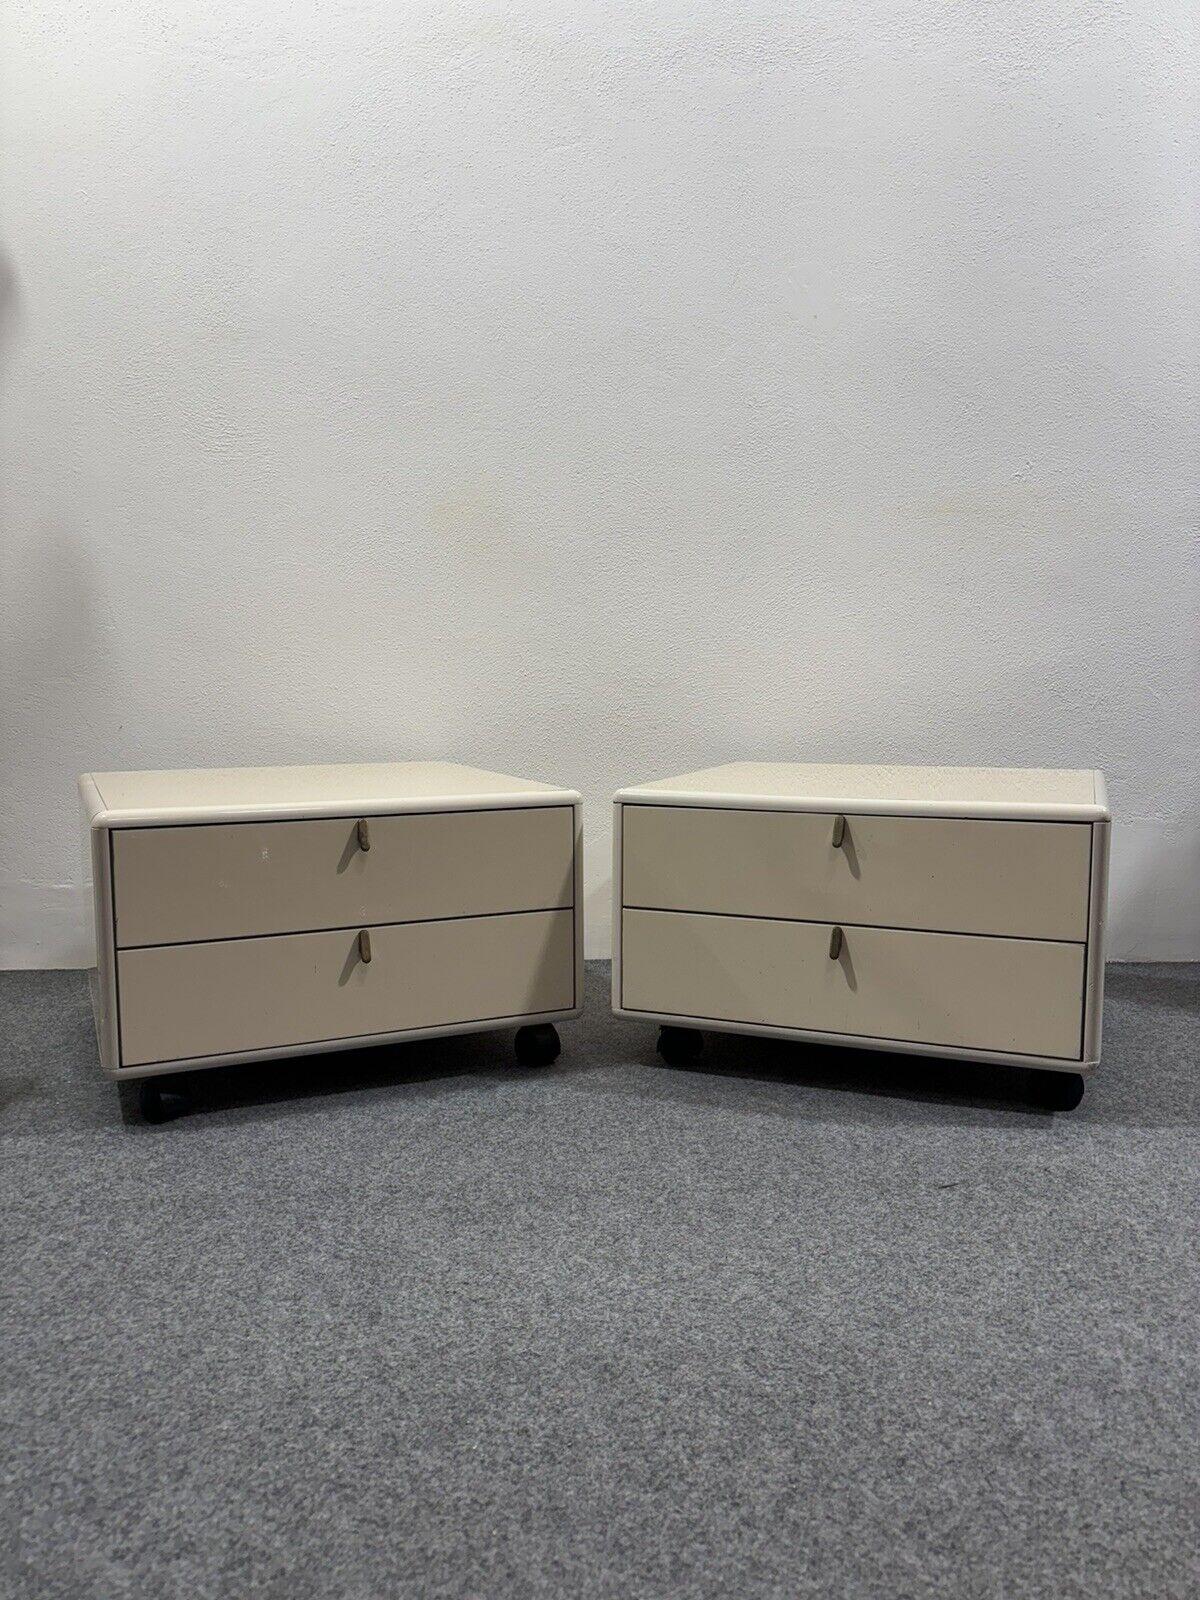 Outstanding pair of bedside tables from the prestigious 